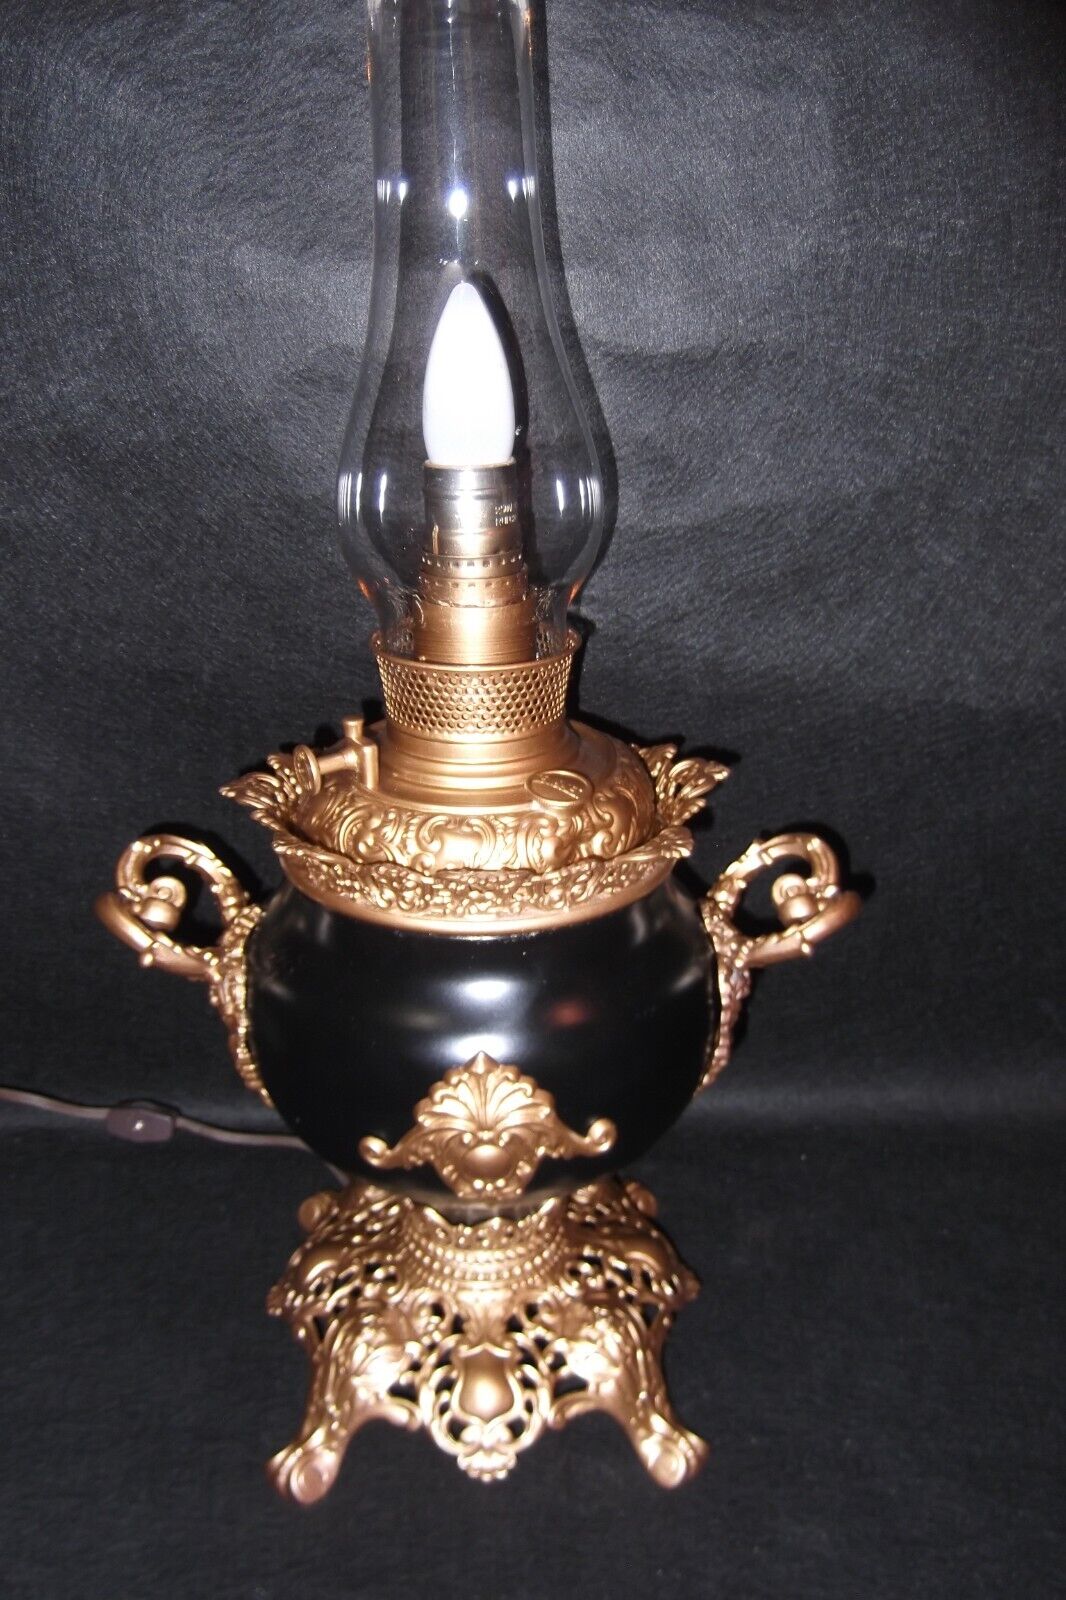 Antique B & H (Bradley Hubbard) Oil Lamp converted to electric